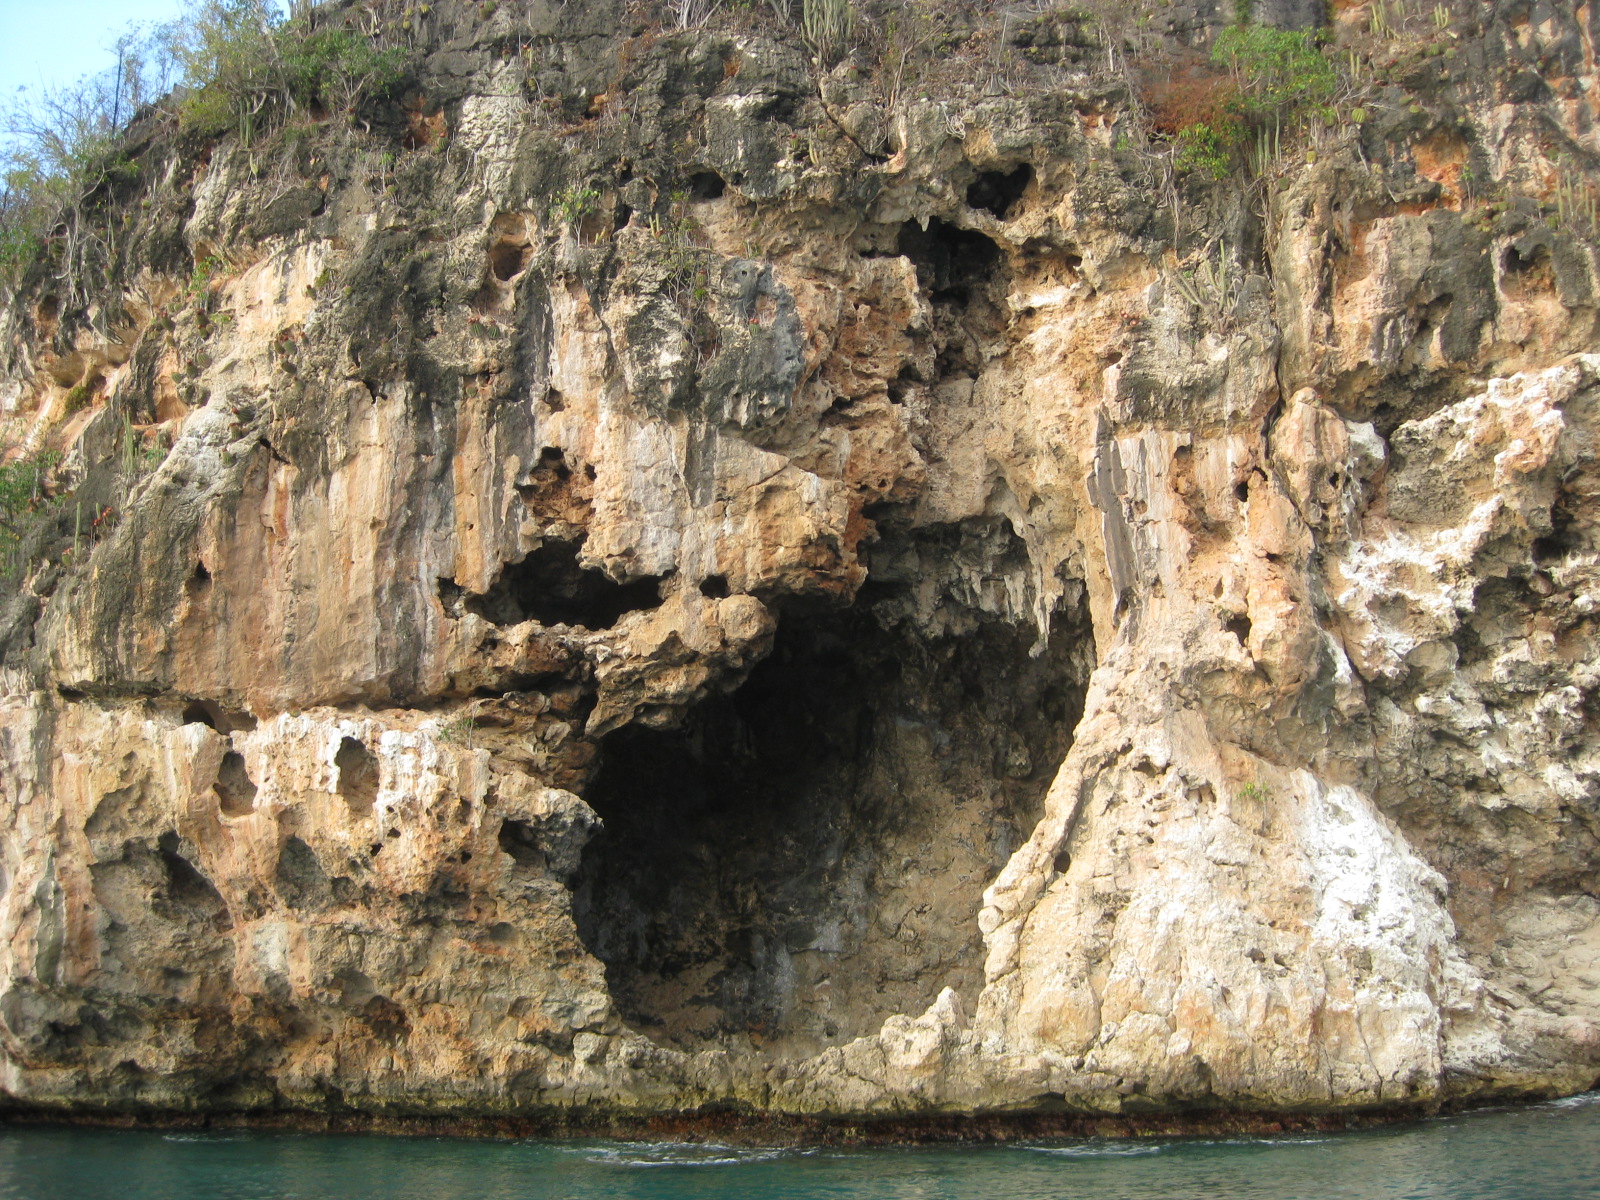 National monument of Anguilla - Fountain Cavern National Park